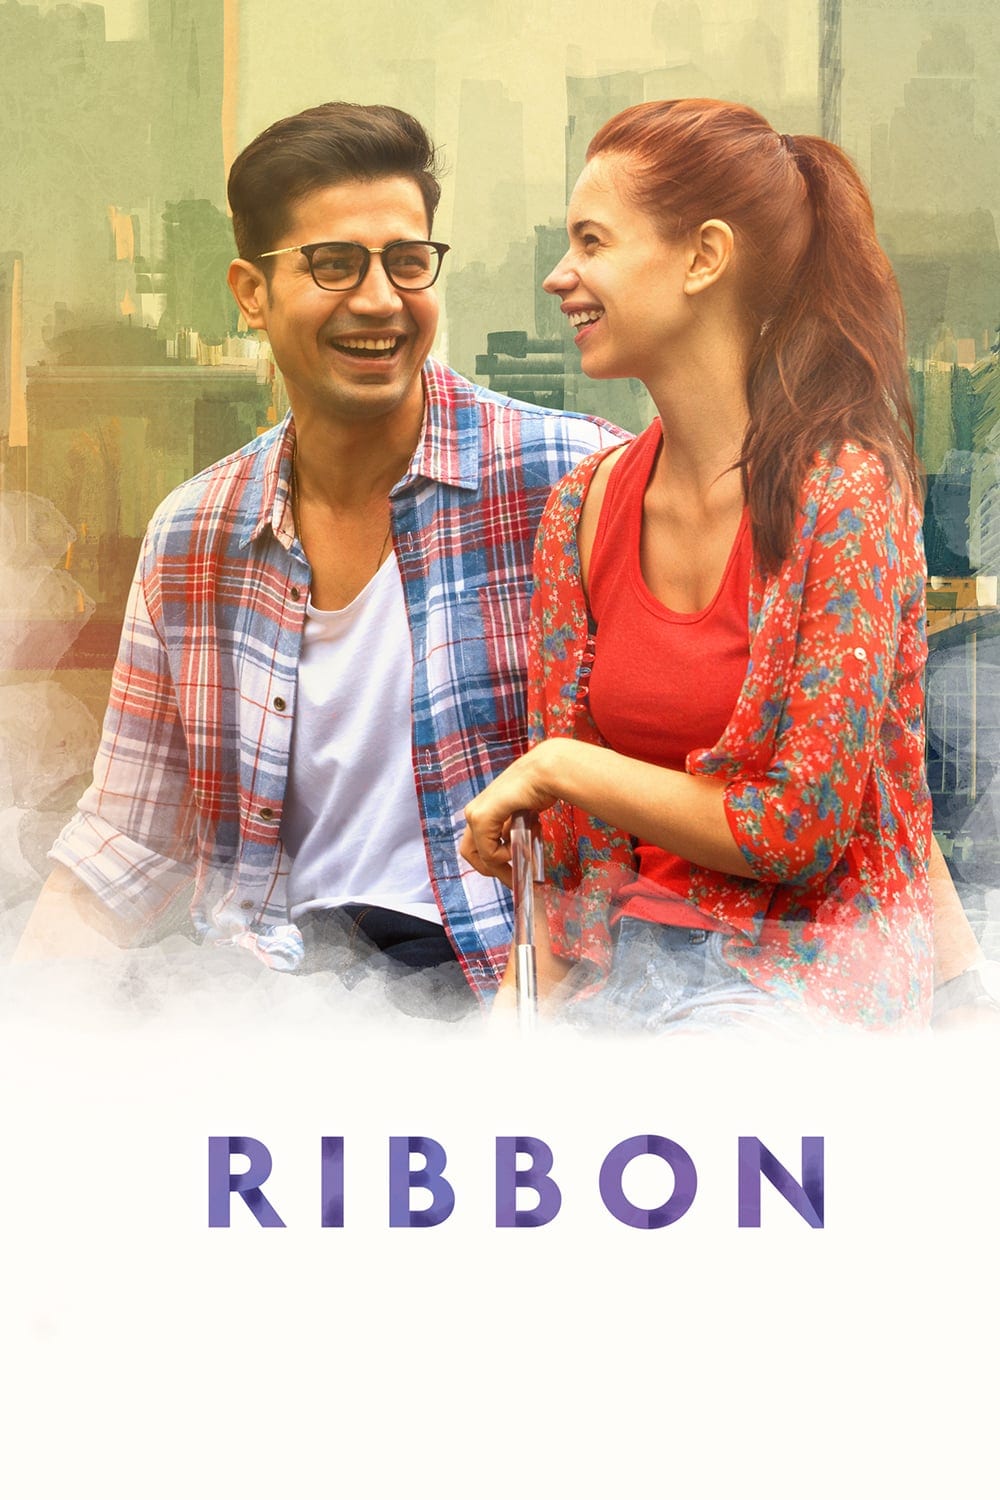 Poster for the movie "Ribbon"